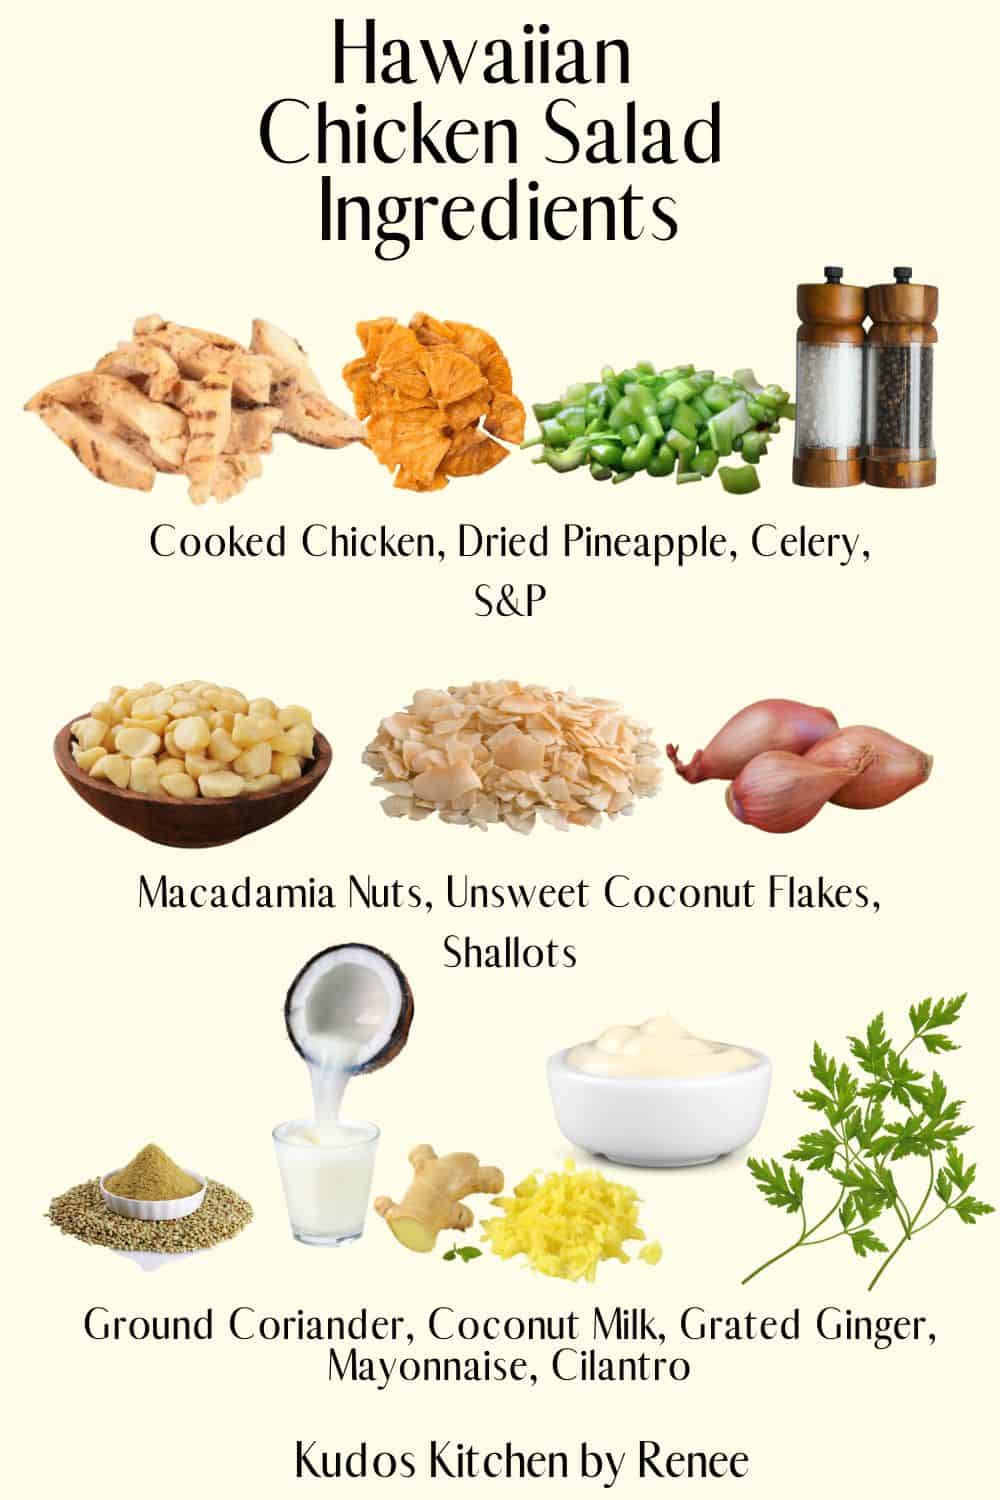 Visual ingredient list for how to make Hawaiian Chicken Salad.